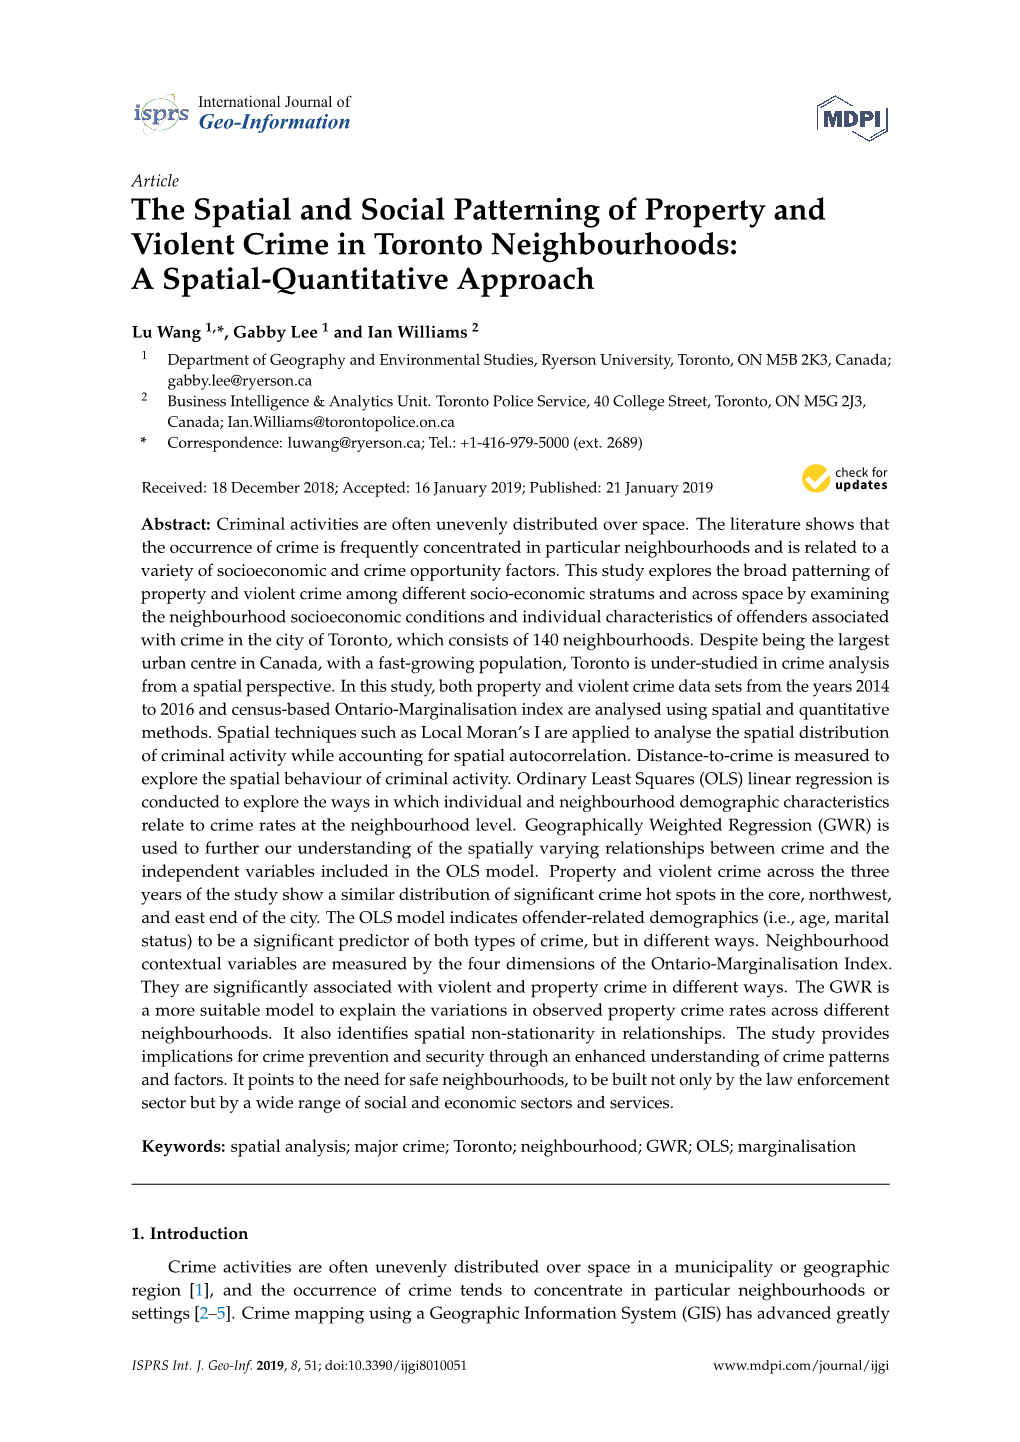 The Spatial and Social Patterning of Property and Violent Crime in Toronto Neighbourhoods: a Spatial-Quantitative Approach